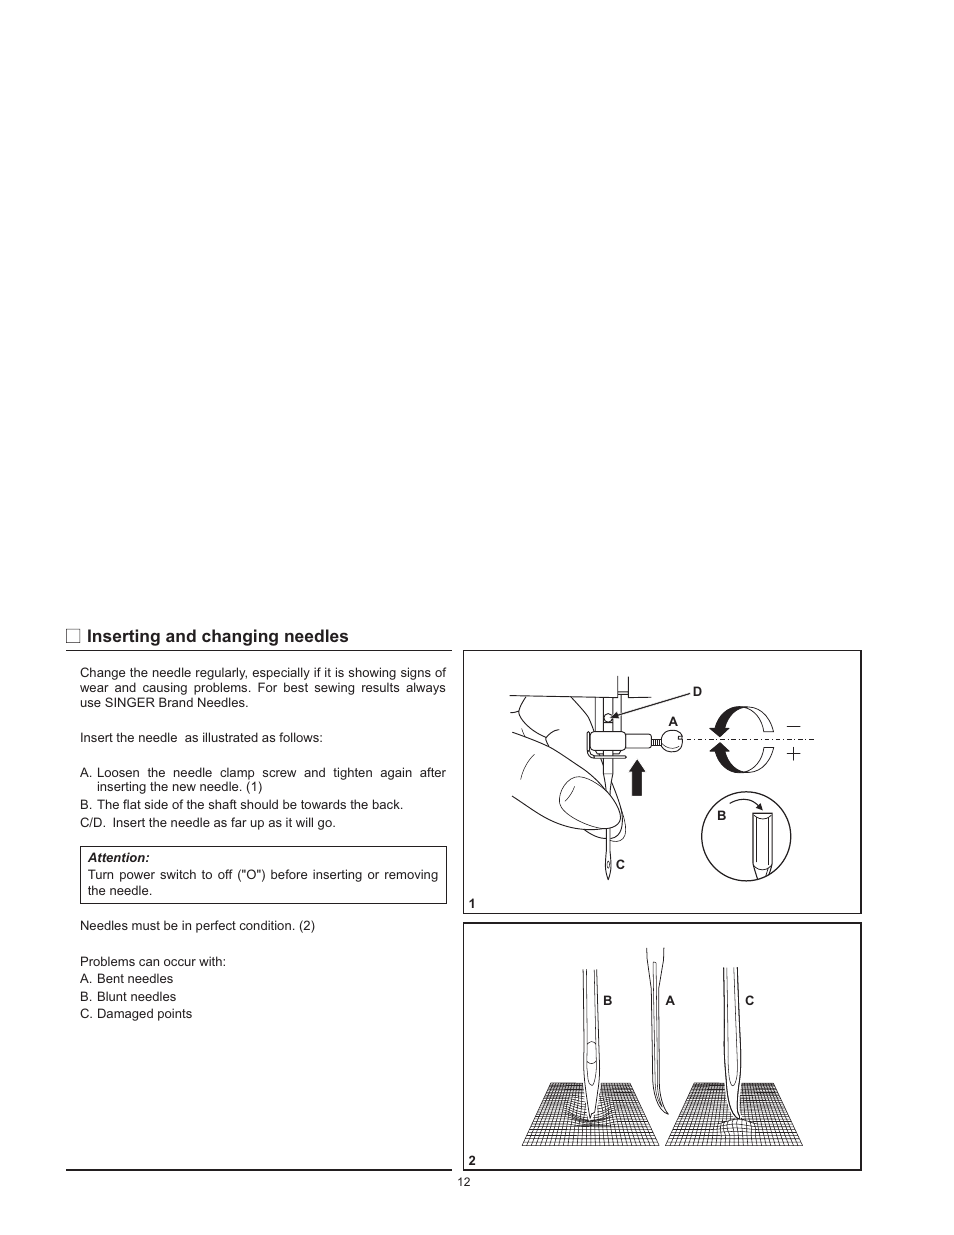 Inserting and changing needles | SINGER 1120 User Manual | Page 15 / 38